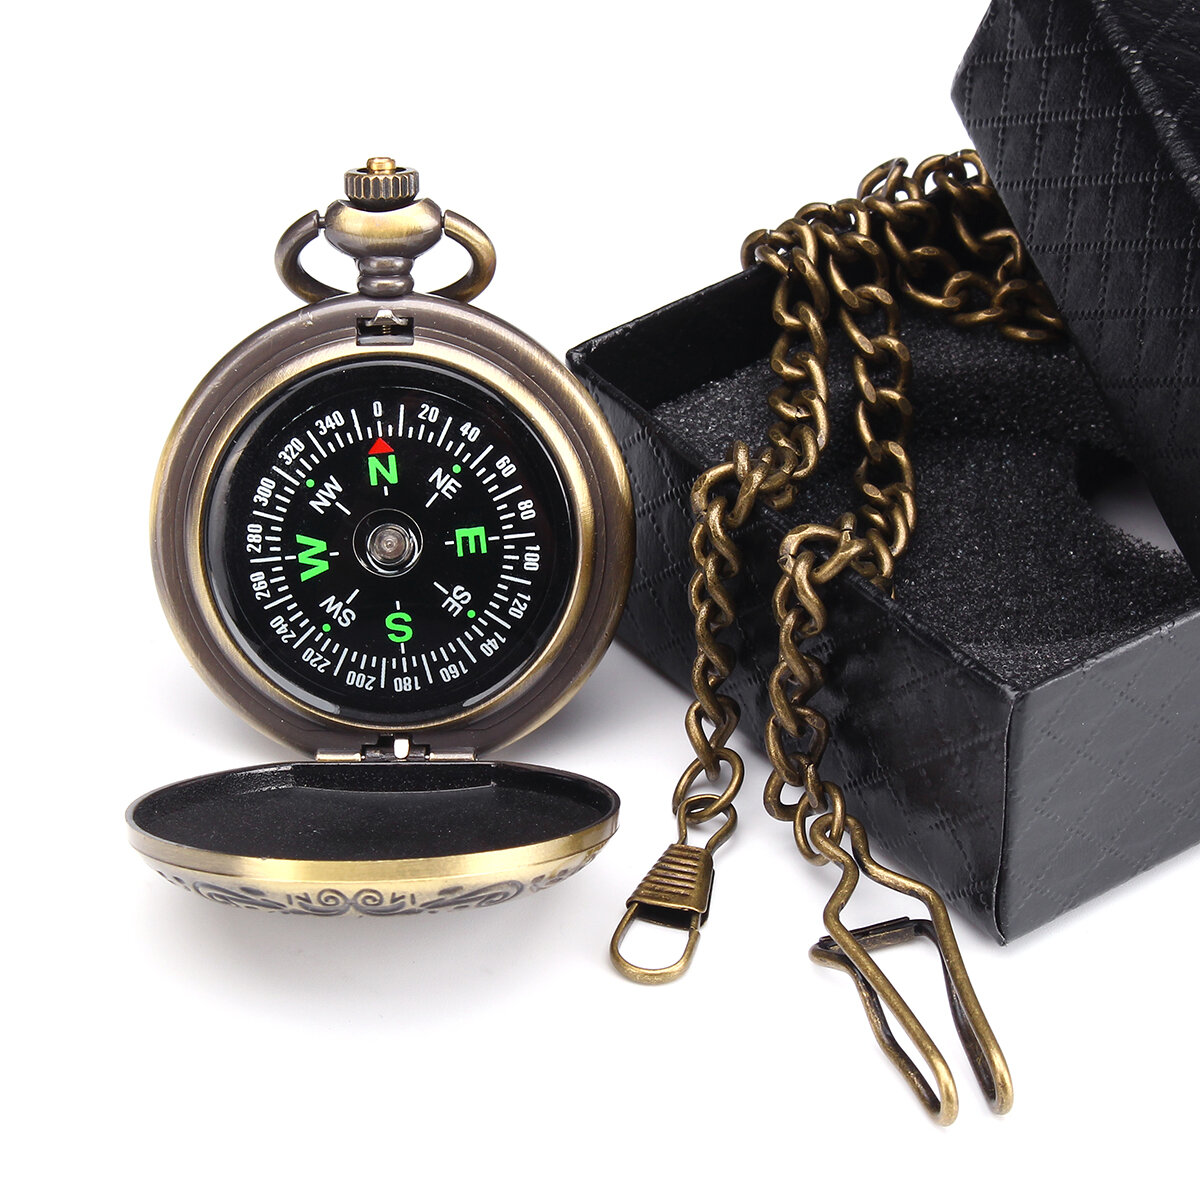 CHARMINER Pocket Compass with Chain Portable Brass Compass Classic Jumping Lid Waterproof Watch Flip-Open Navigation Tools